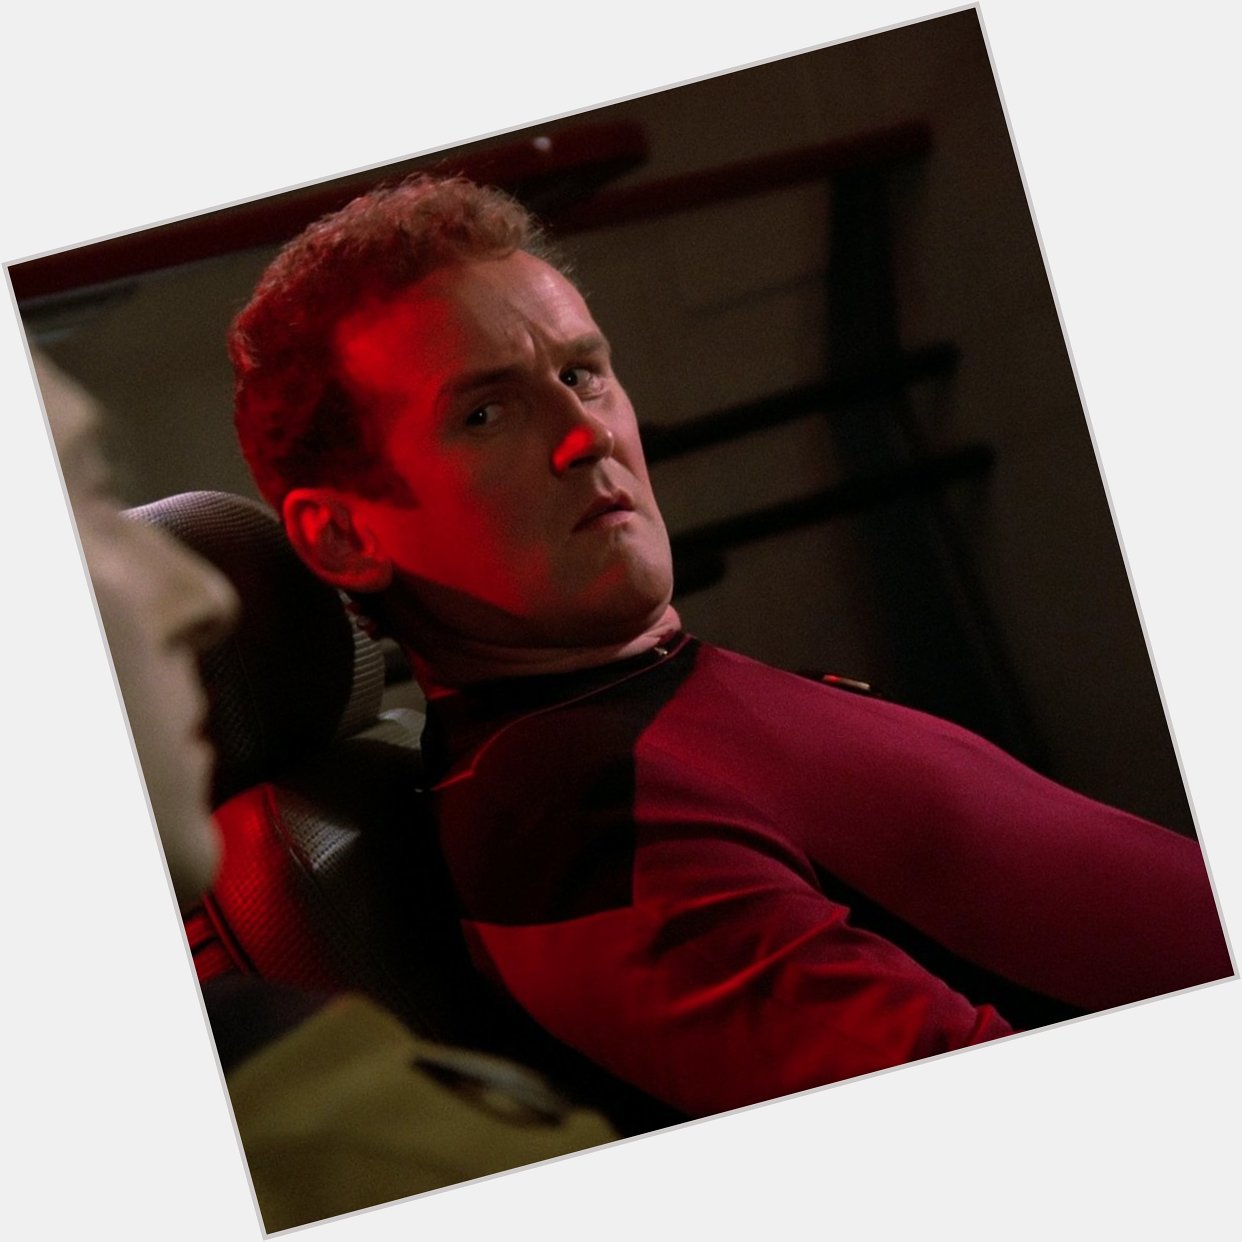 Happy Birthday to Colm Meaney, the nexus of suffering for Starfleet. 